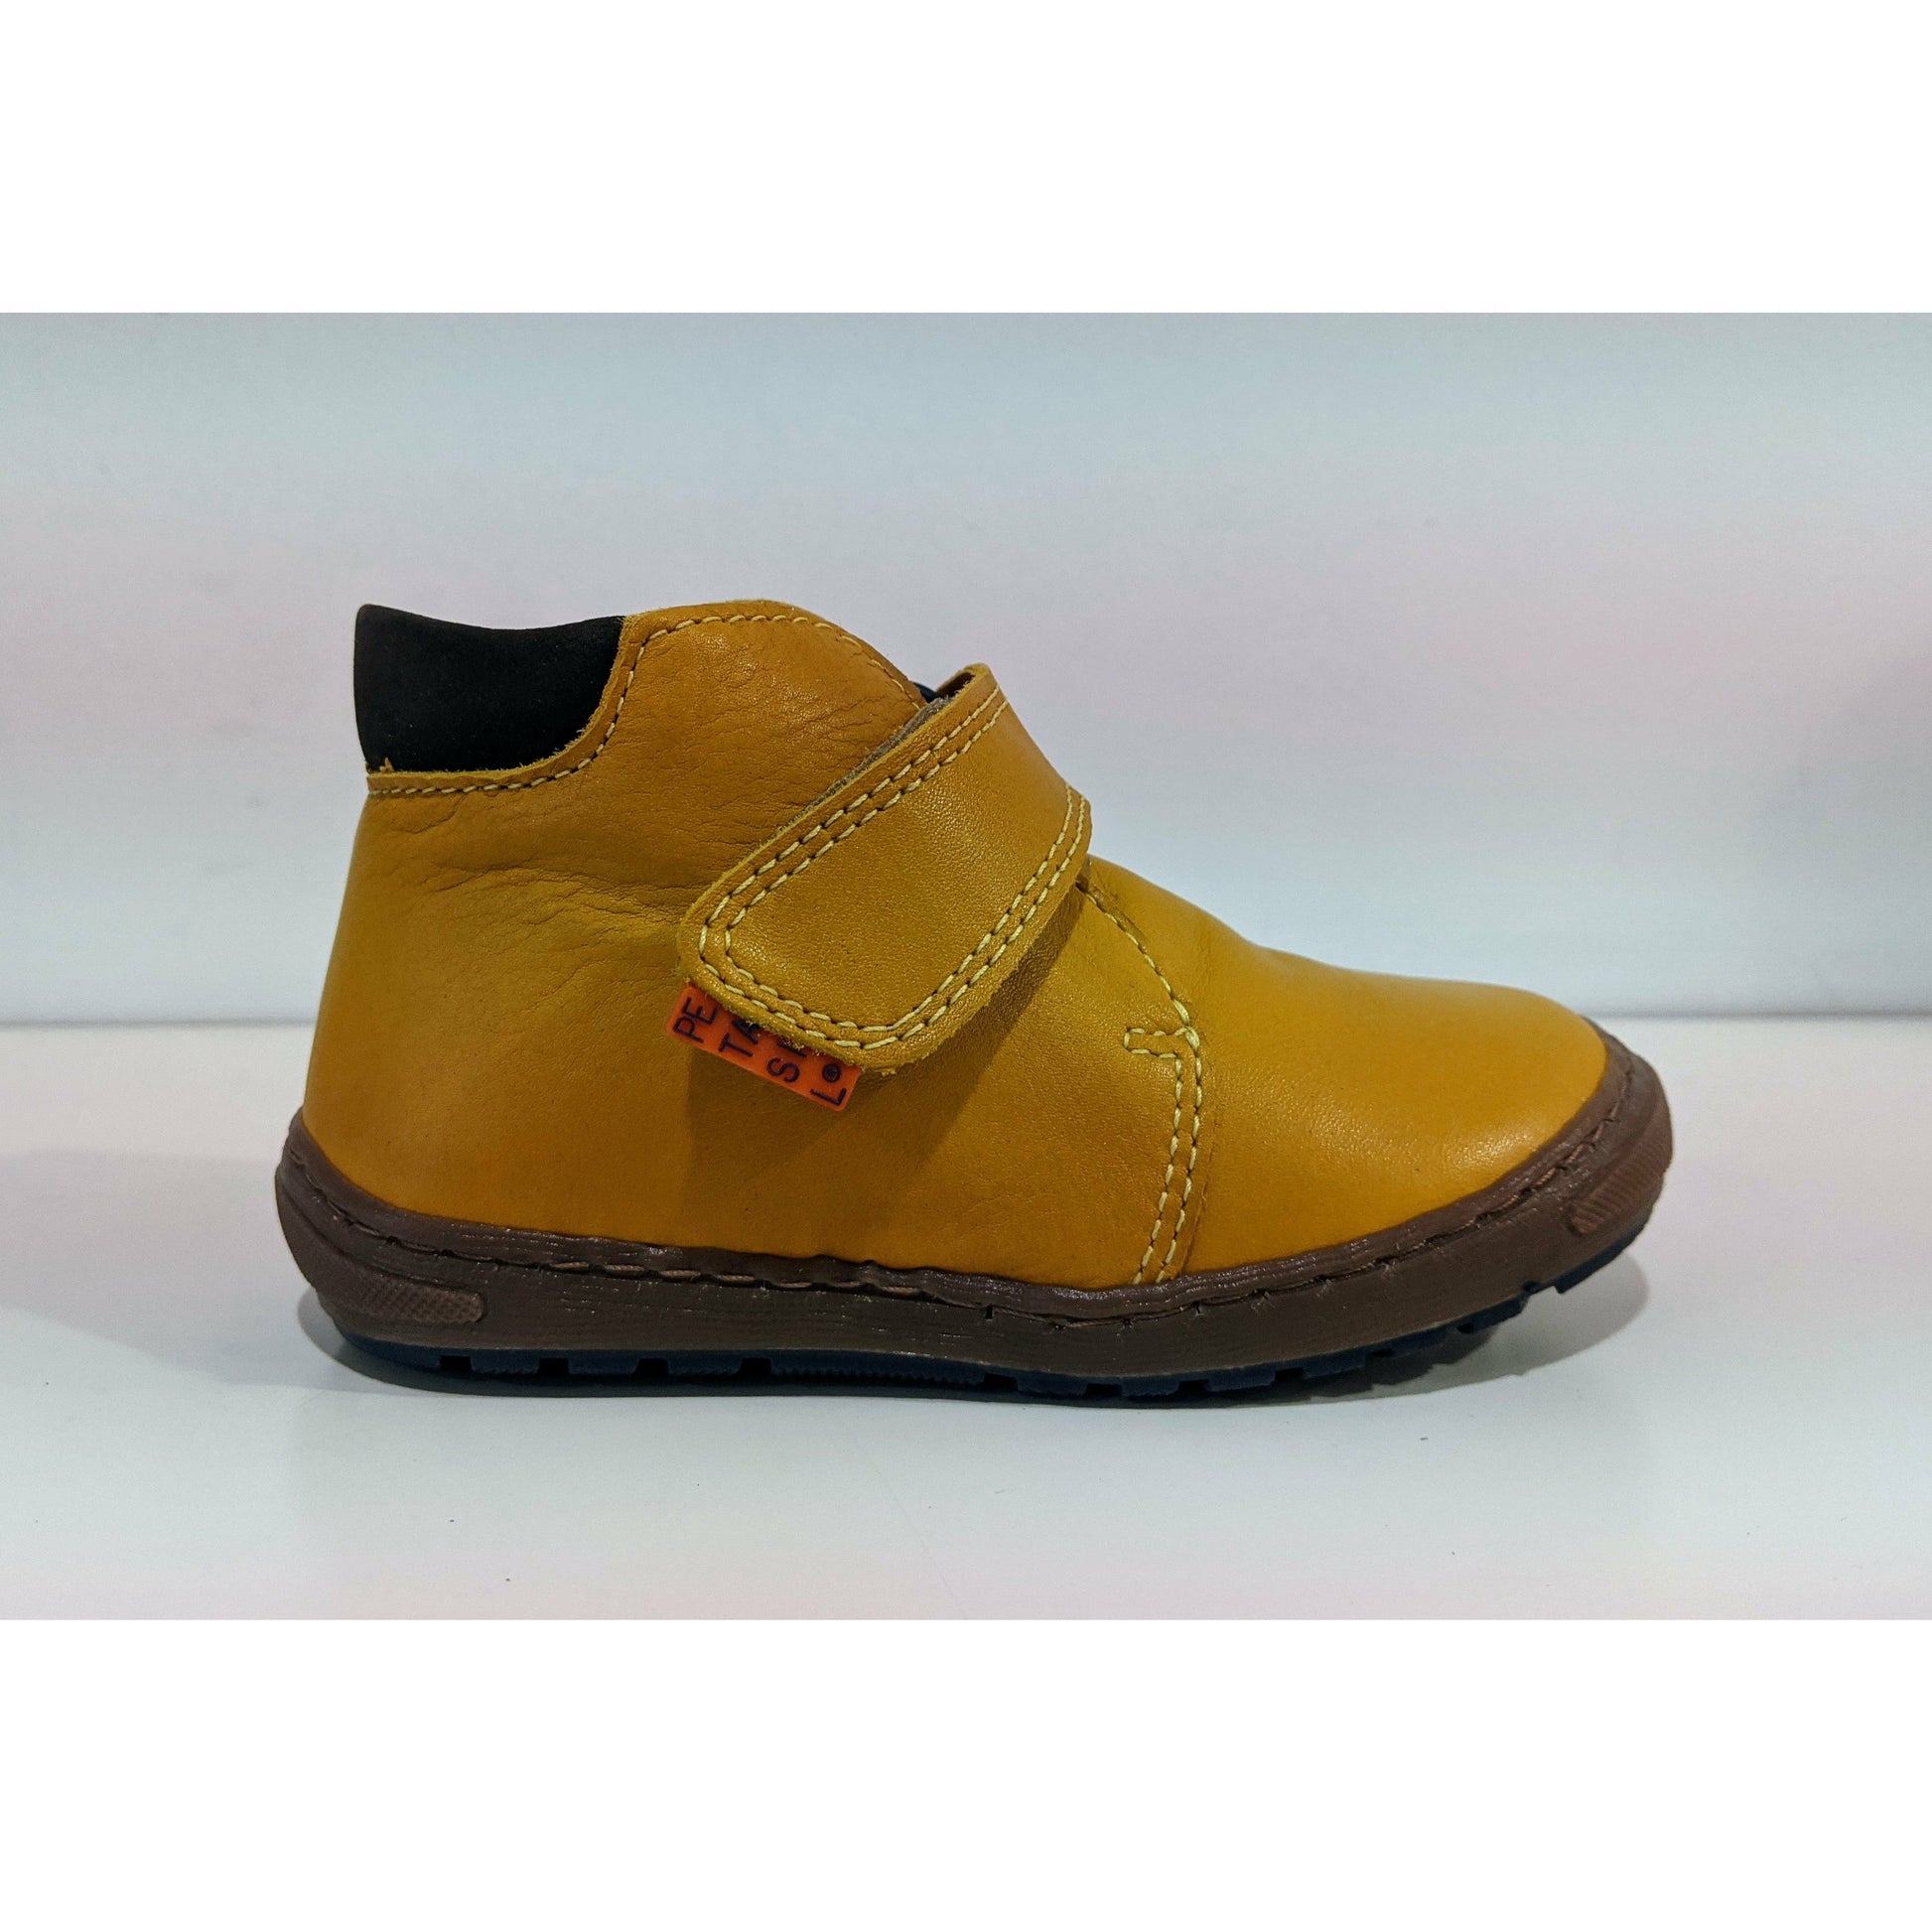 A boys ankle boot by Petasil, style Jason, in yellow with velcro fastening. Right side view.